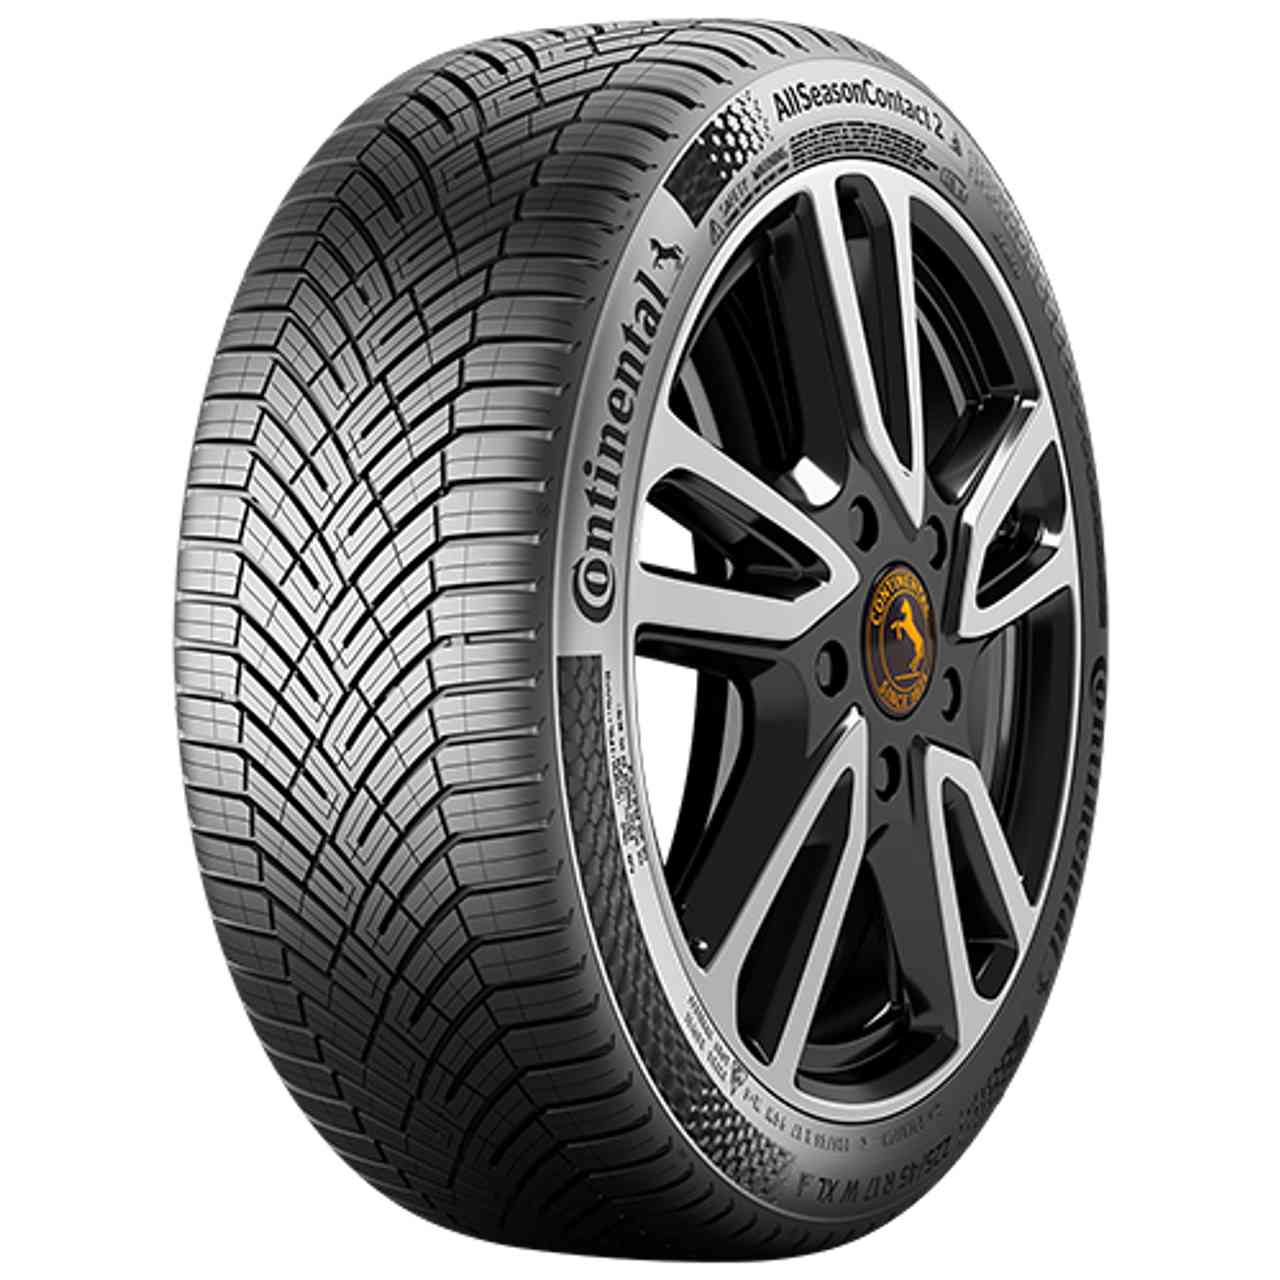 CONTINENTAL ALLSEASONCONTACT 2 (EVc) 205/60R16 96V BSW XL